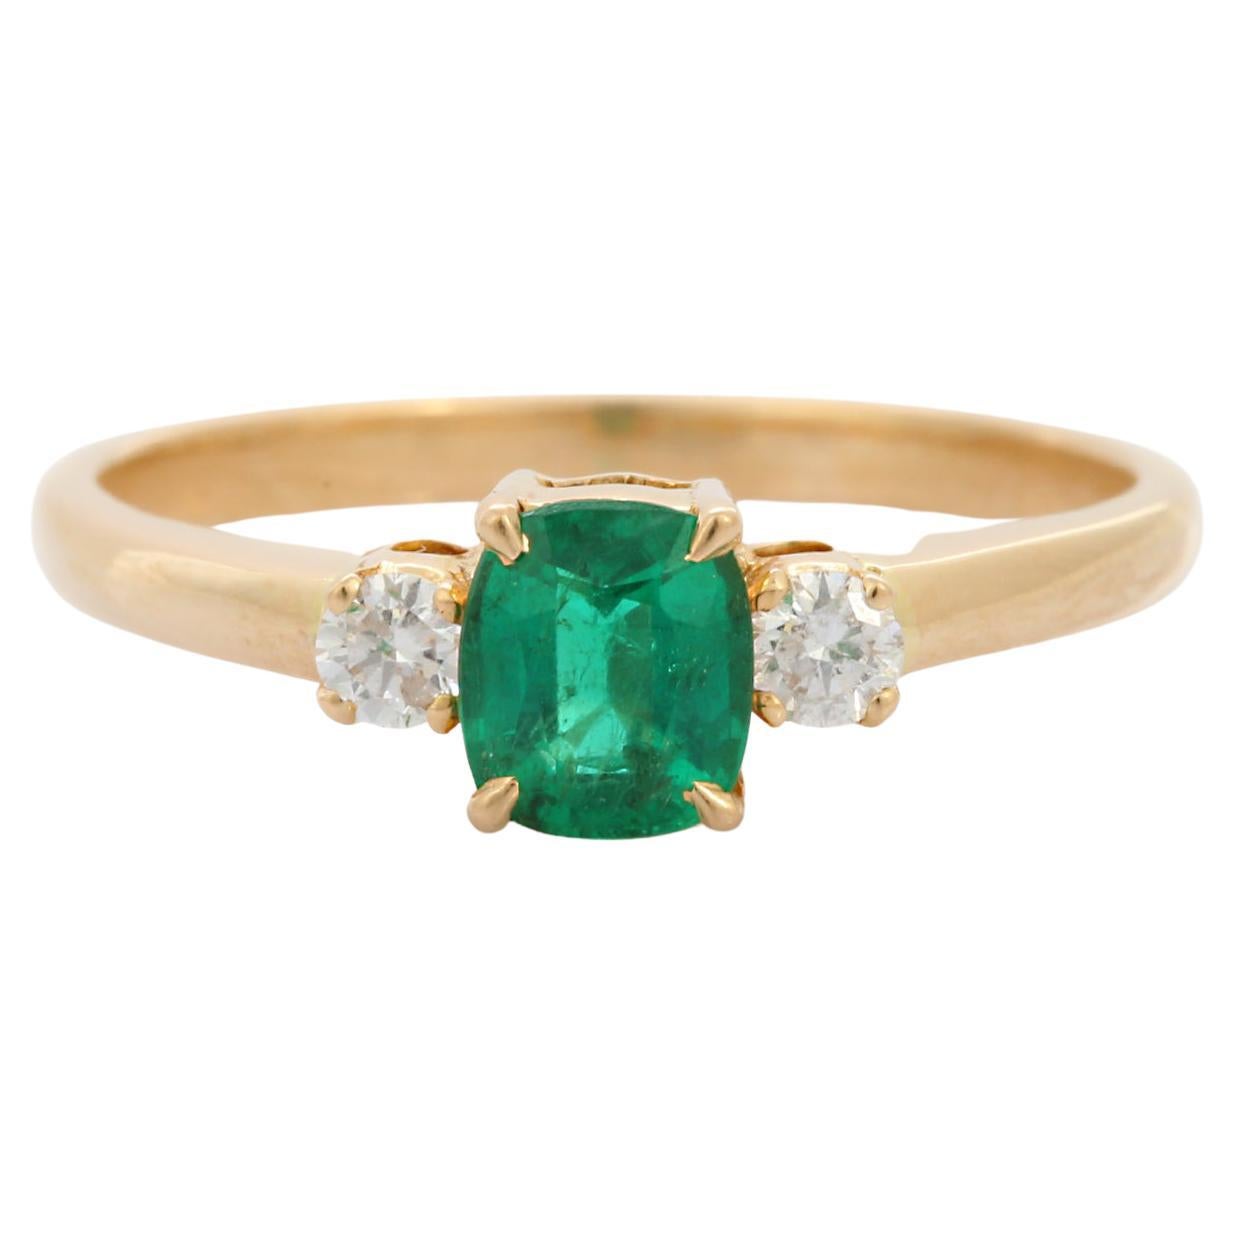 For Sale:  Emerald Gemstone Ring in 18k Solid Yellow Gold with Diamonds